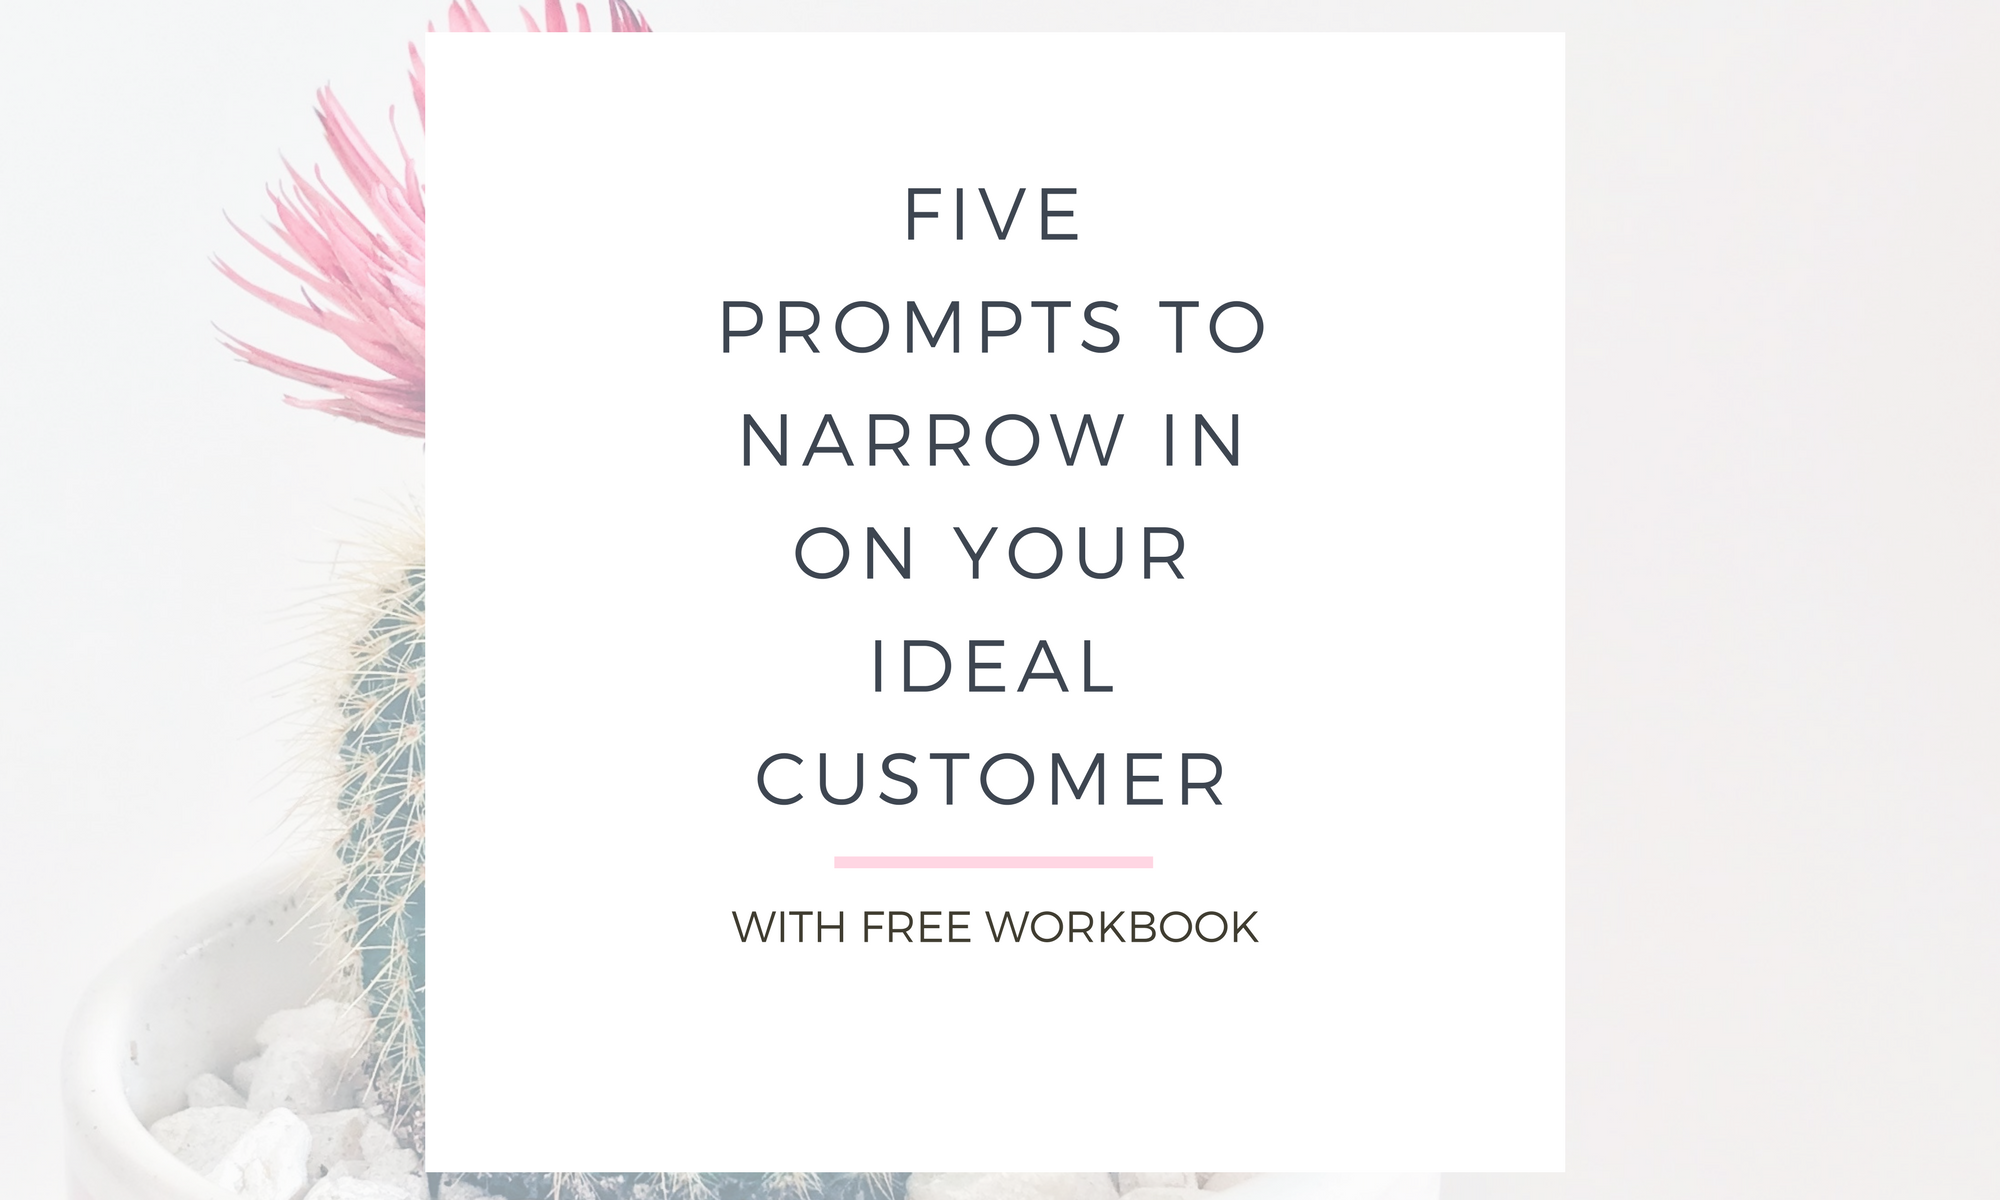 Five Prompts to Narrow In On Your Ideal Customer